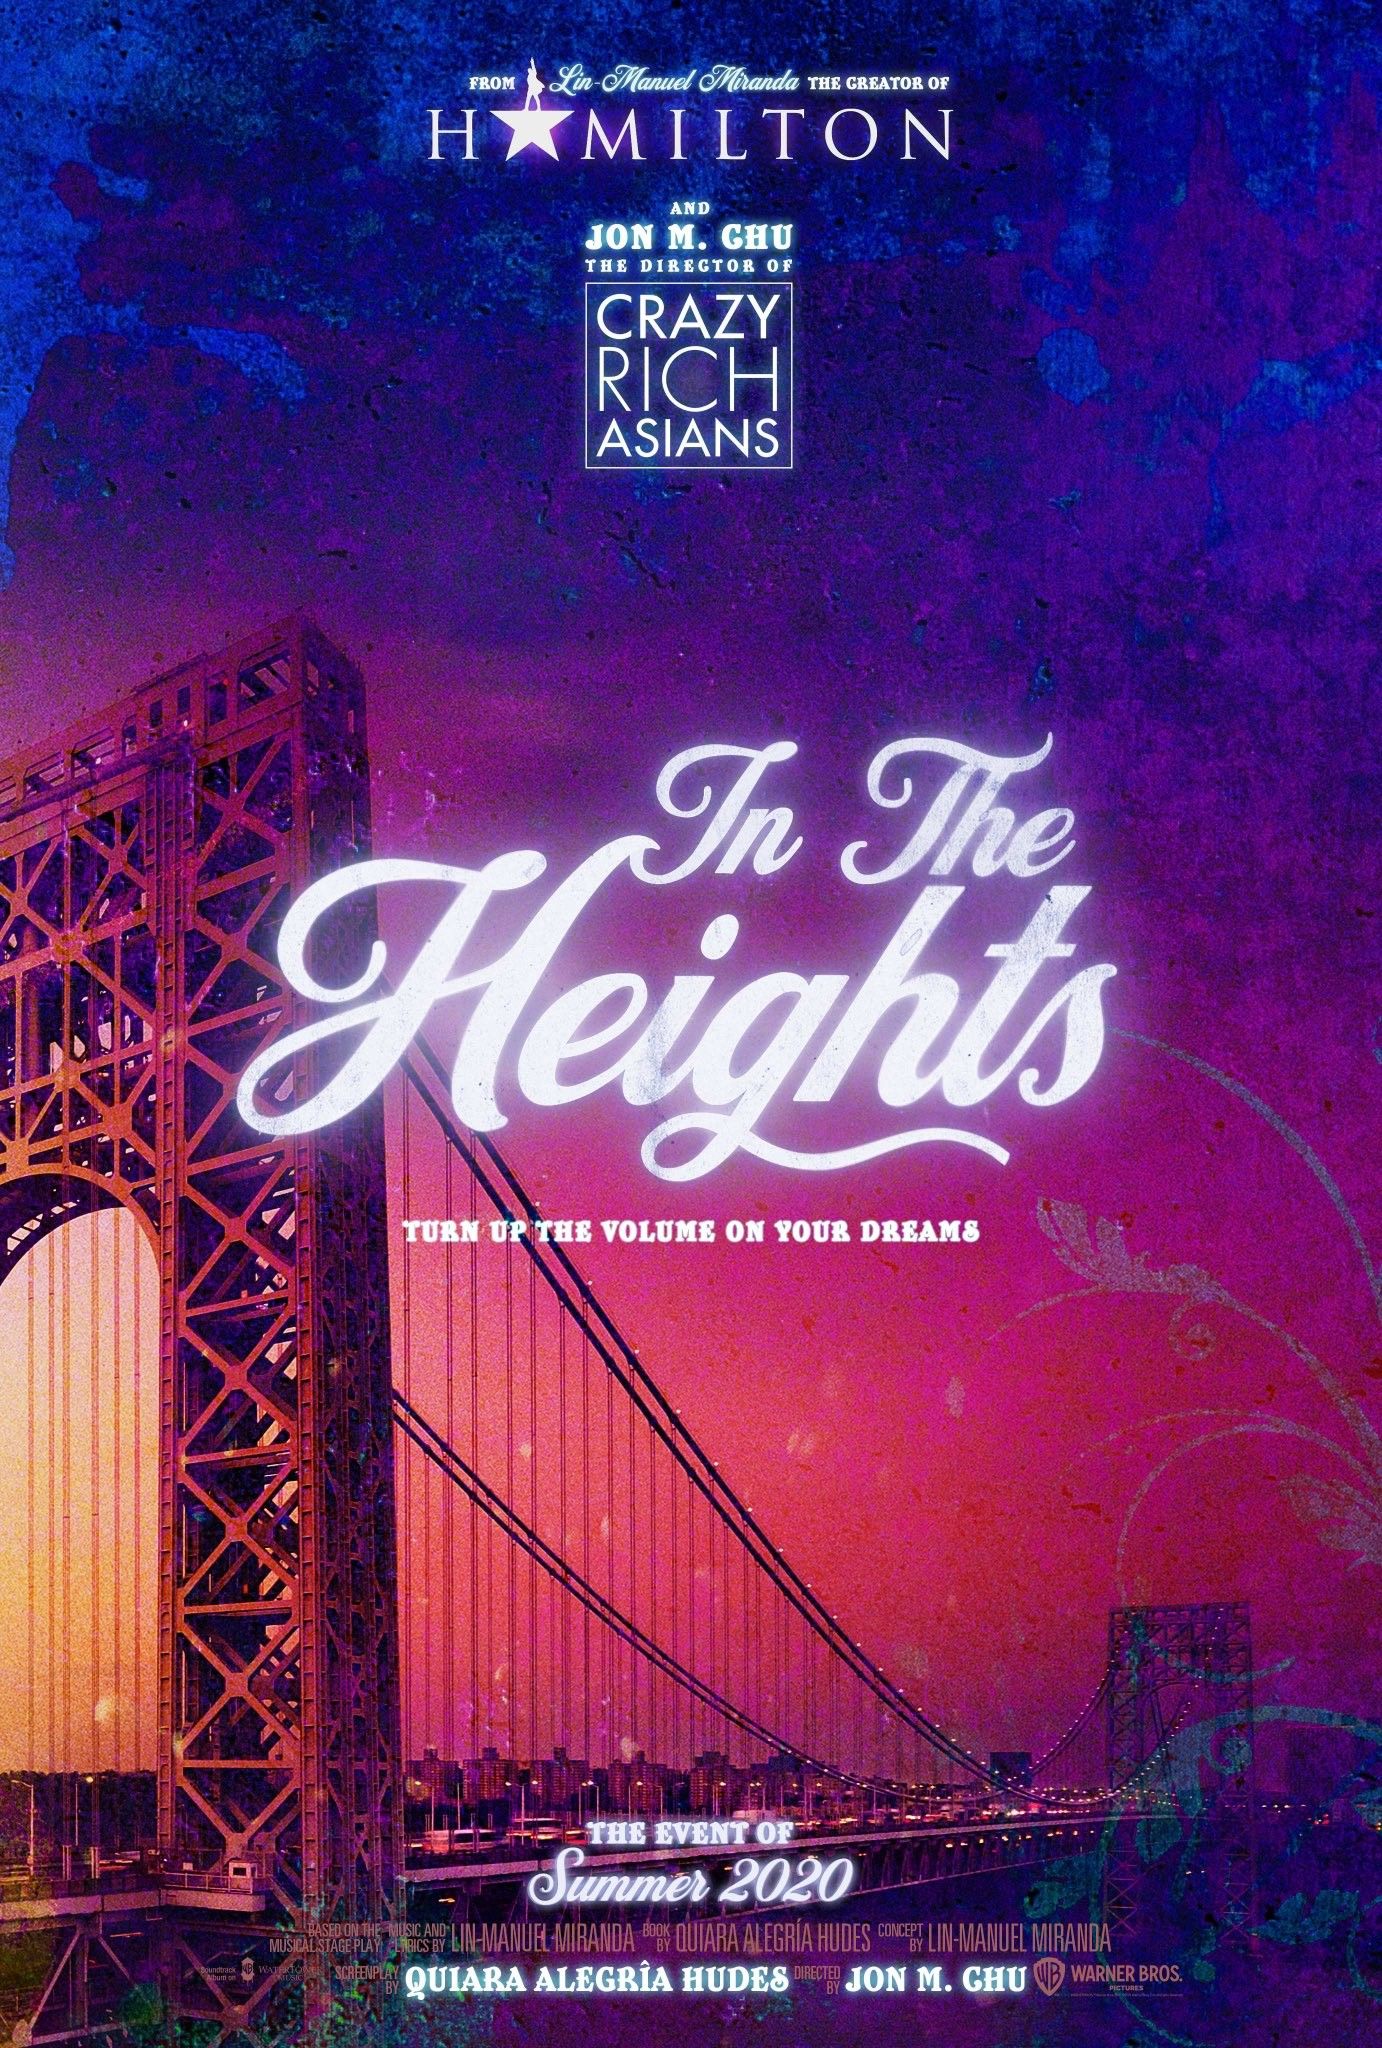 In the Heights Trailer: Jon M. Chu Brings the Hit Musical to Life